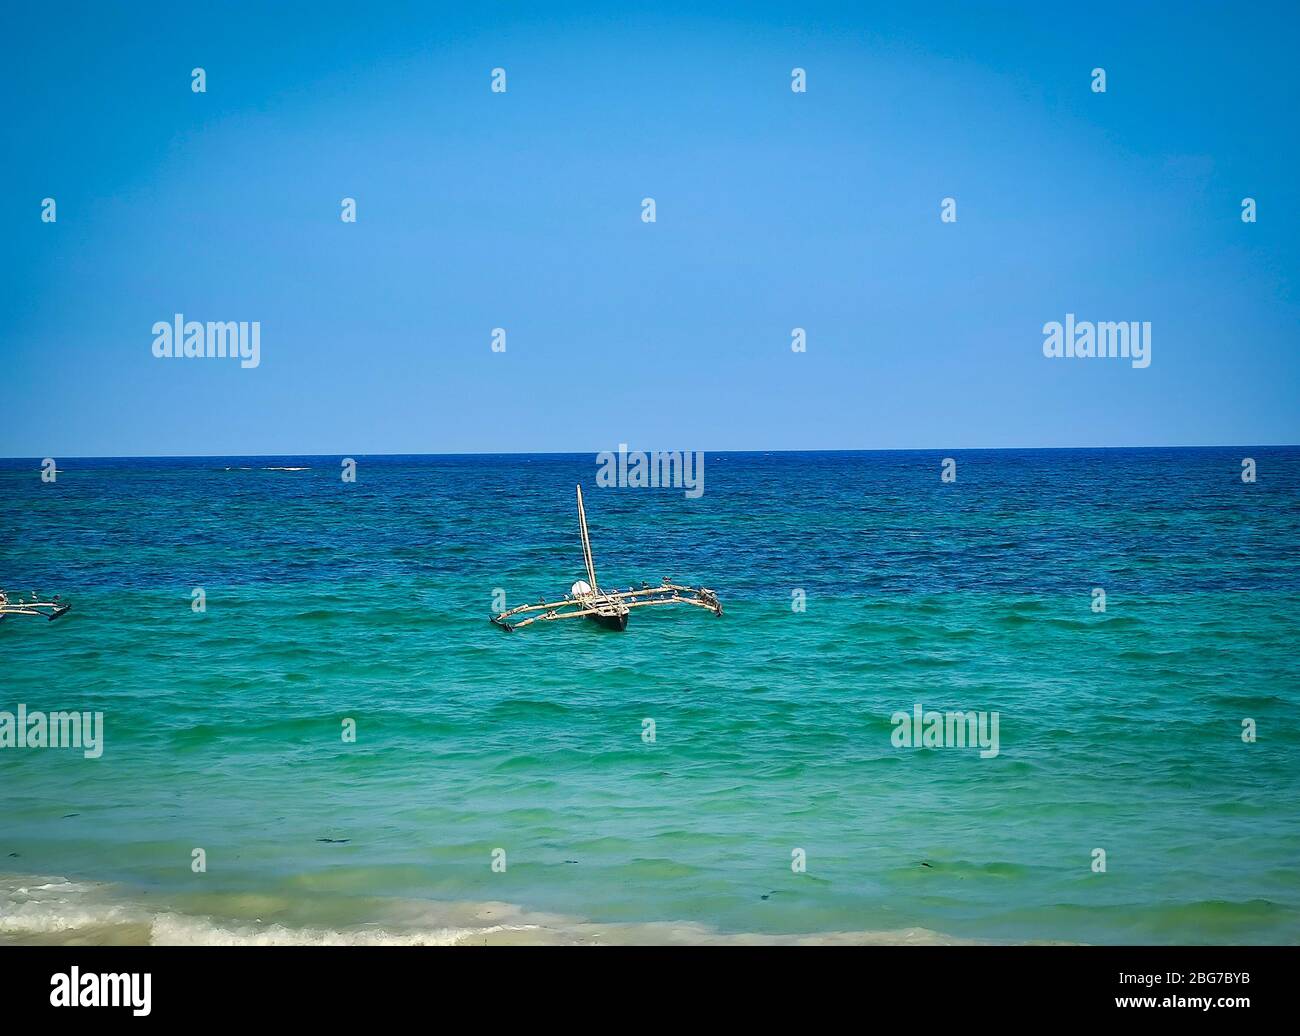 Typical Swahili wooden canoe on the sea at Diani beach, Kenya. It is a beautiful long beach in Africa. Stock Photo